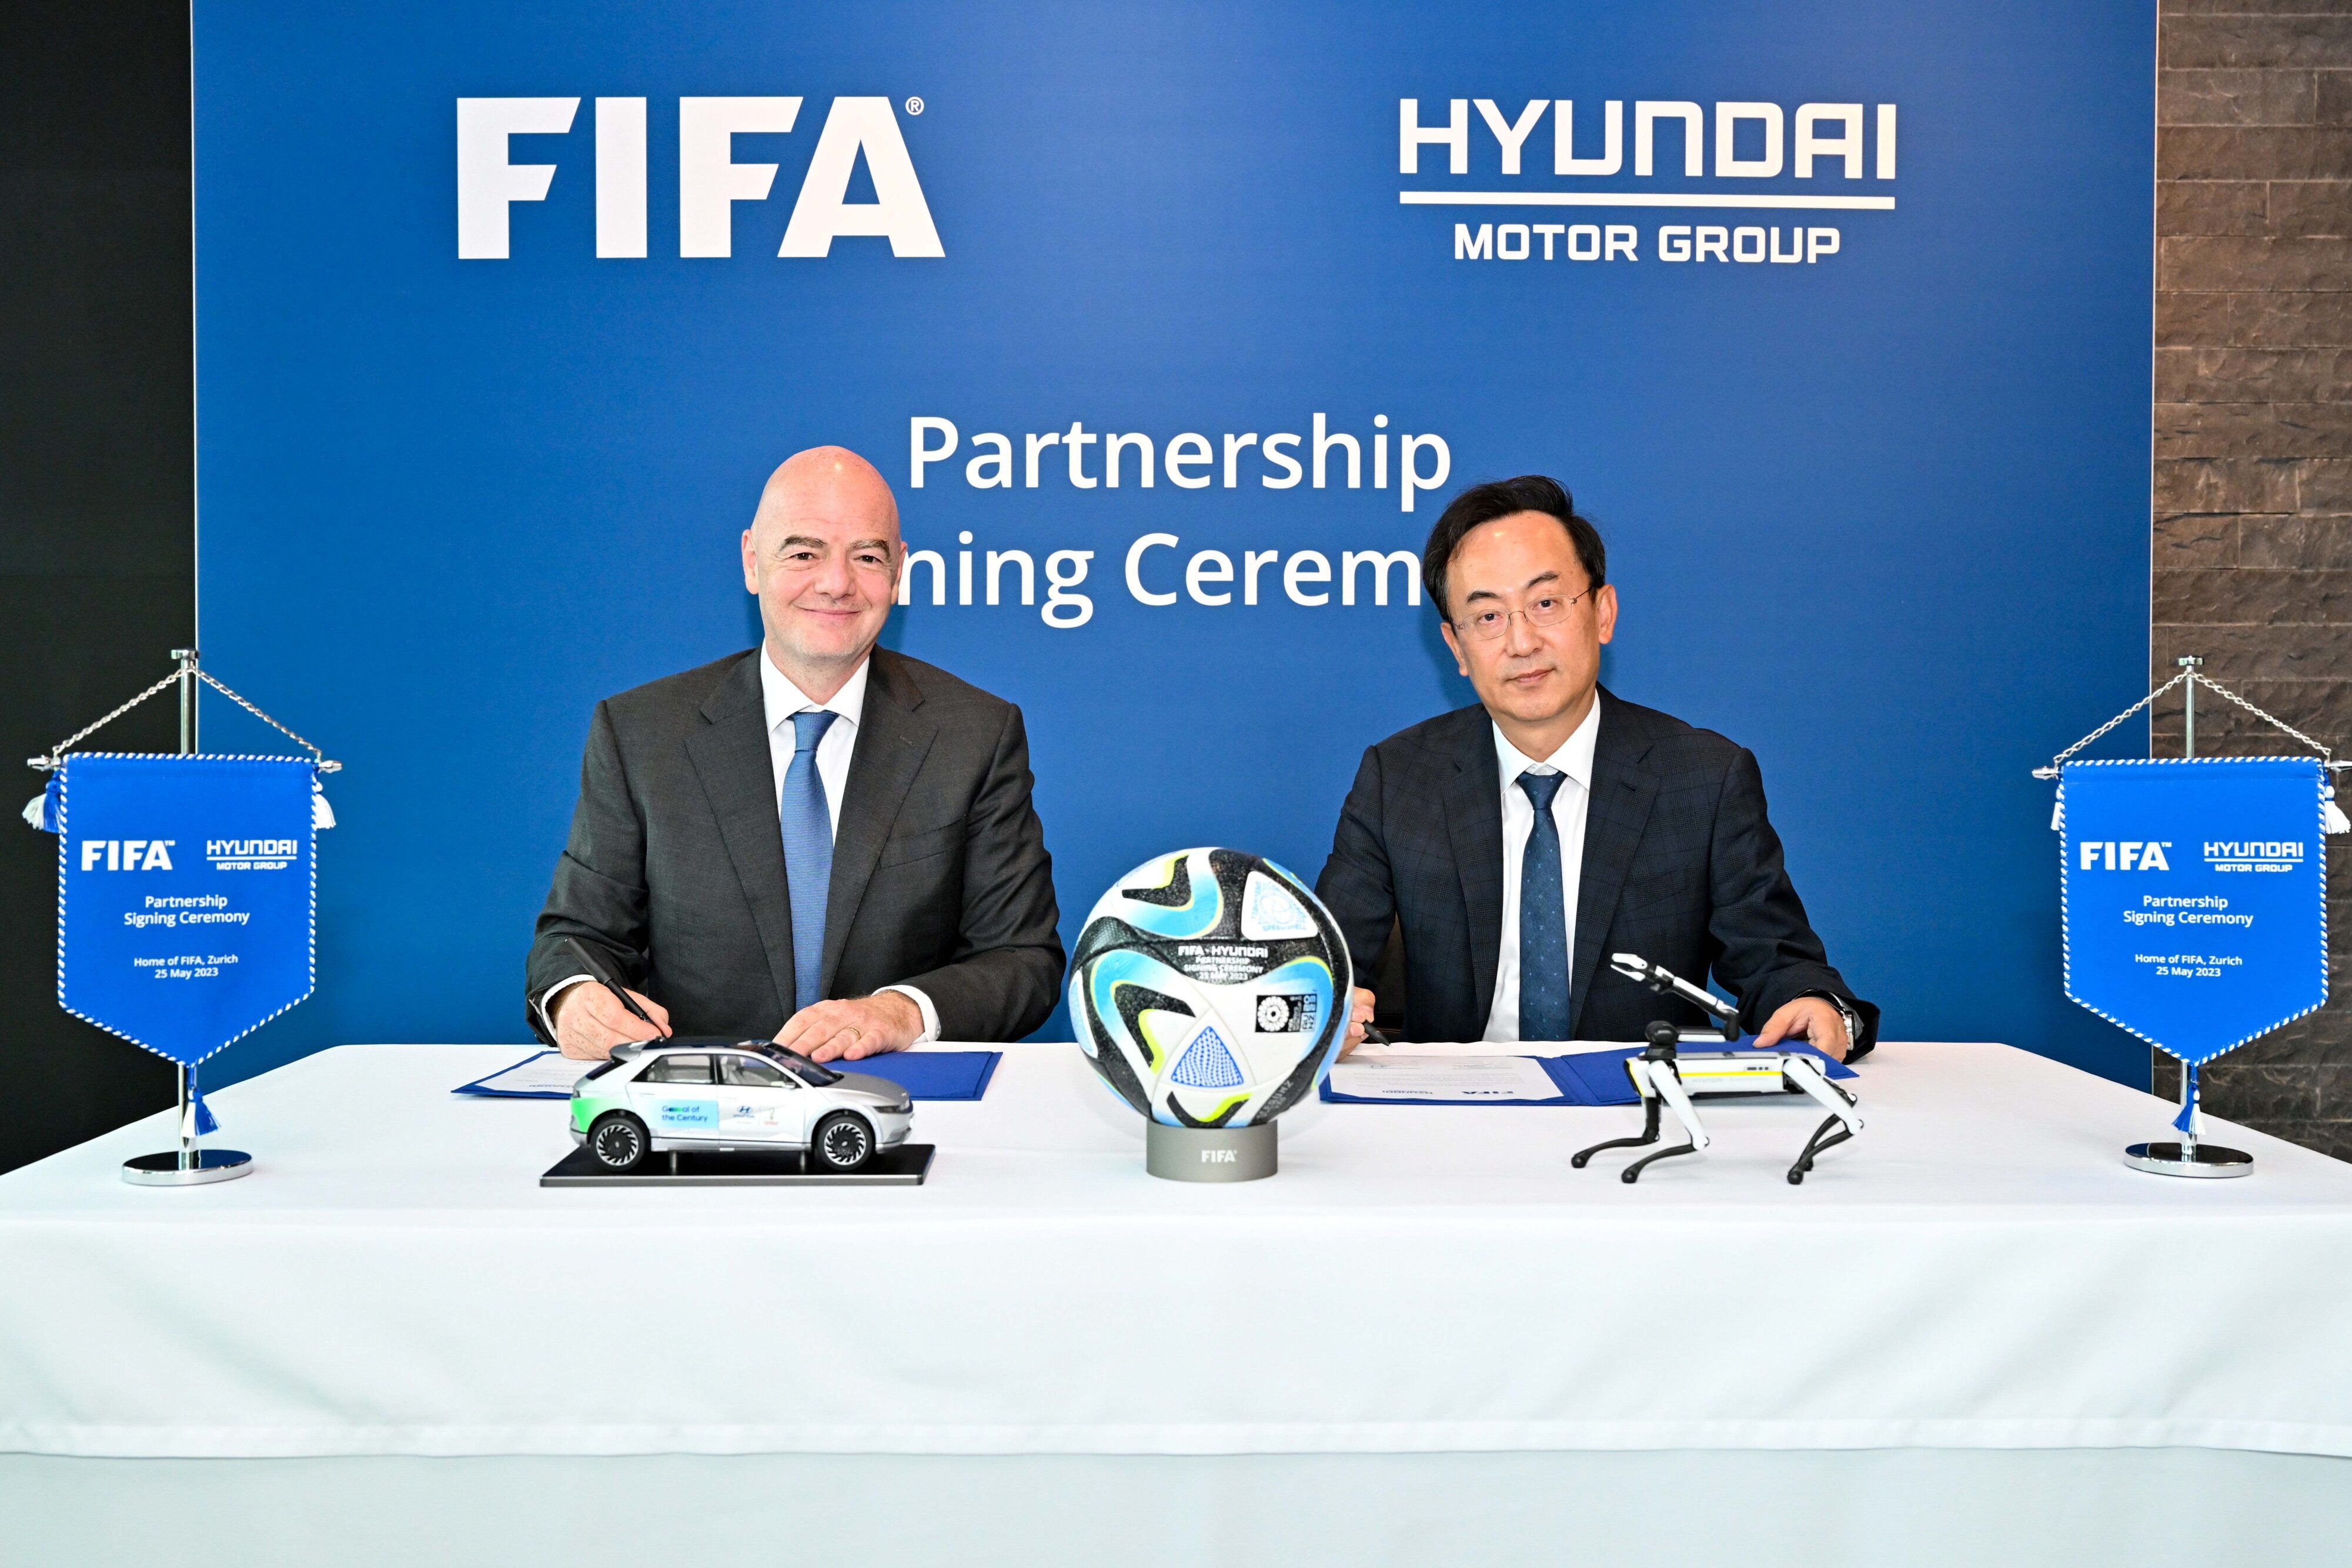 Representatives from Hyundai Motor Group and FIFA signing an agreement to extend the partnerships of the two brands.